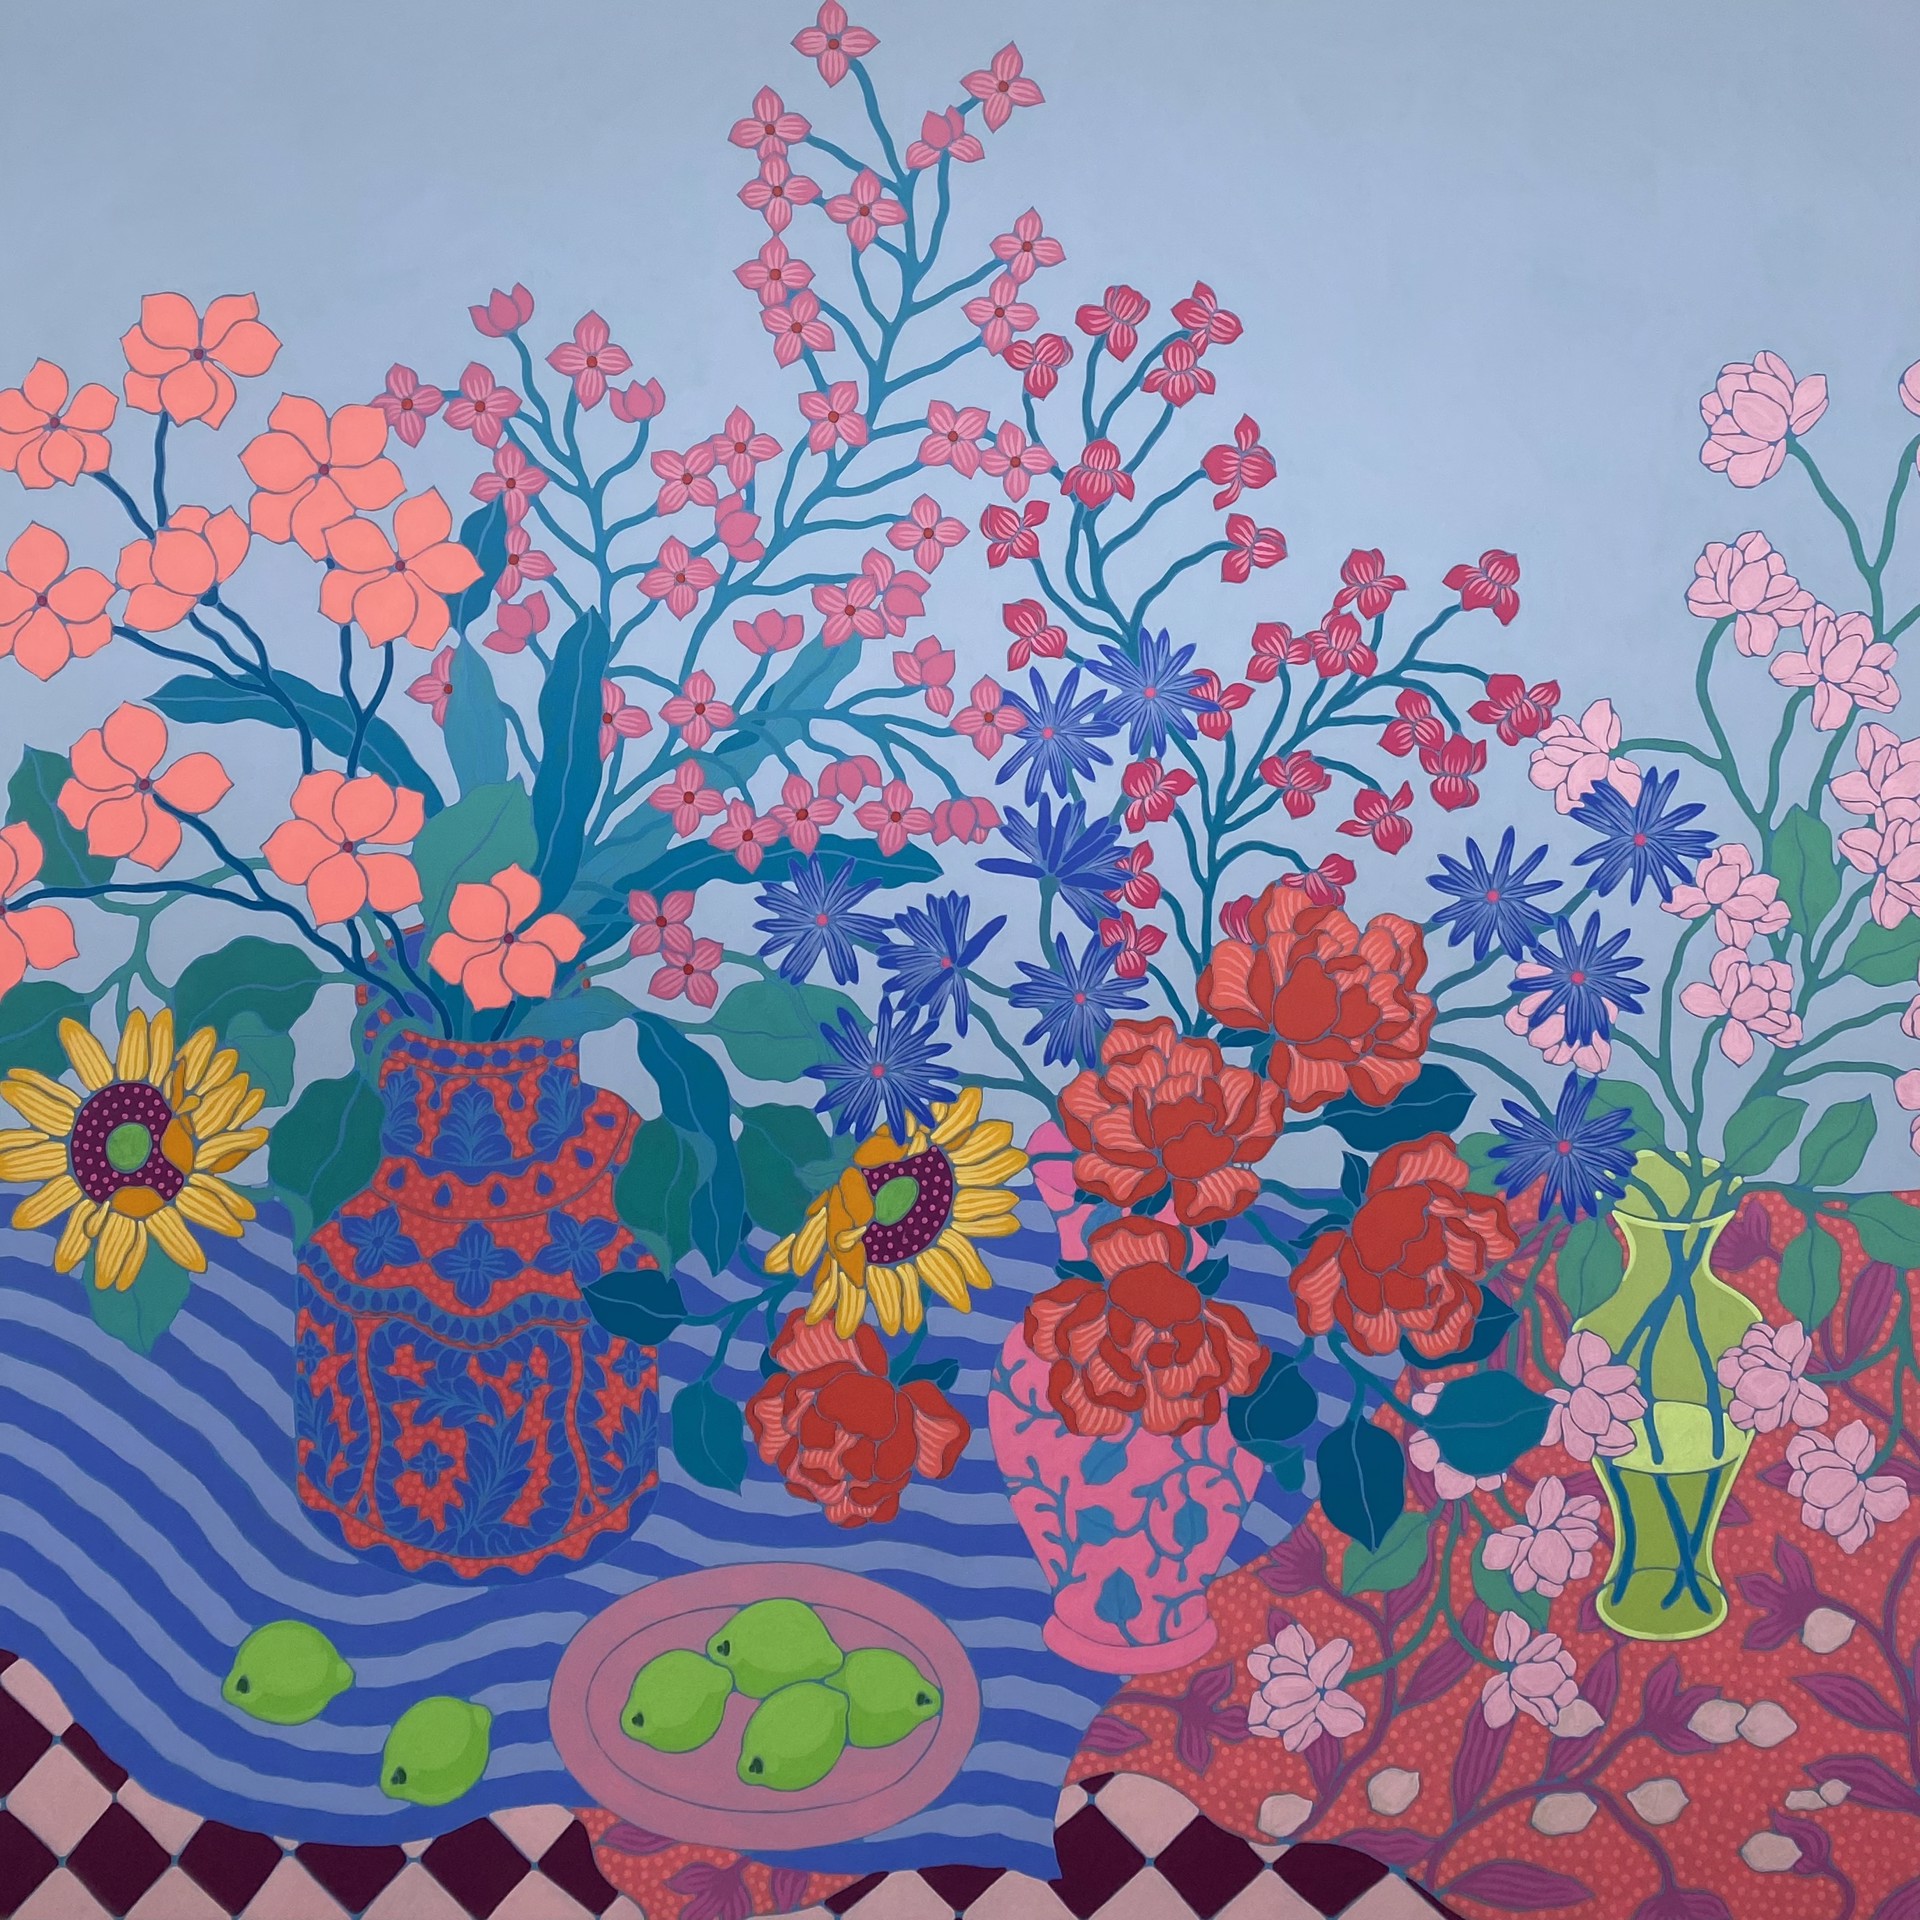 Three Bouquets on Striped Rug by Sarah Ingraham